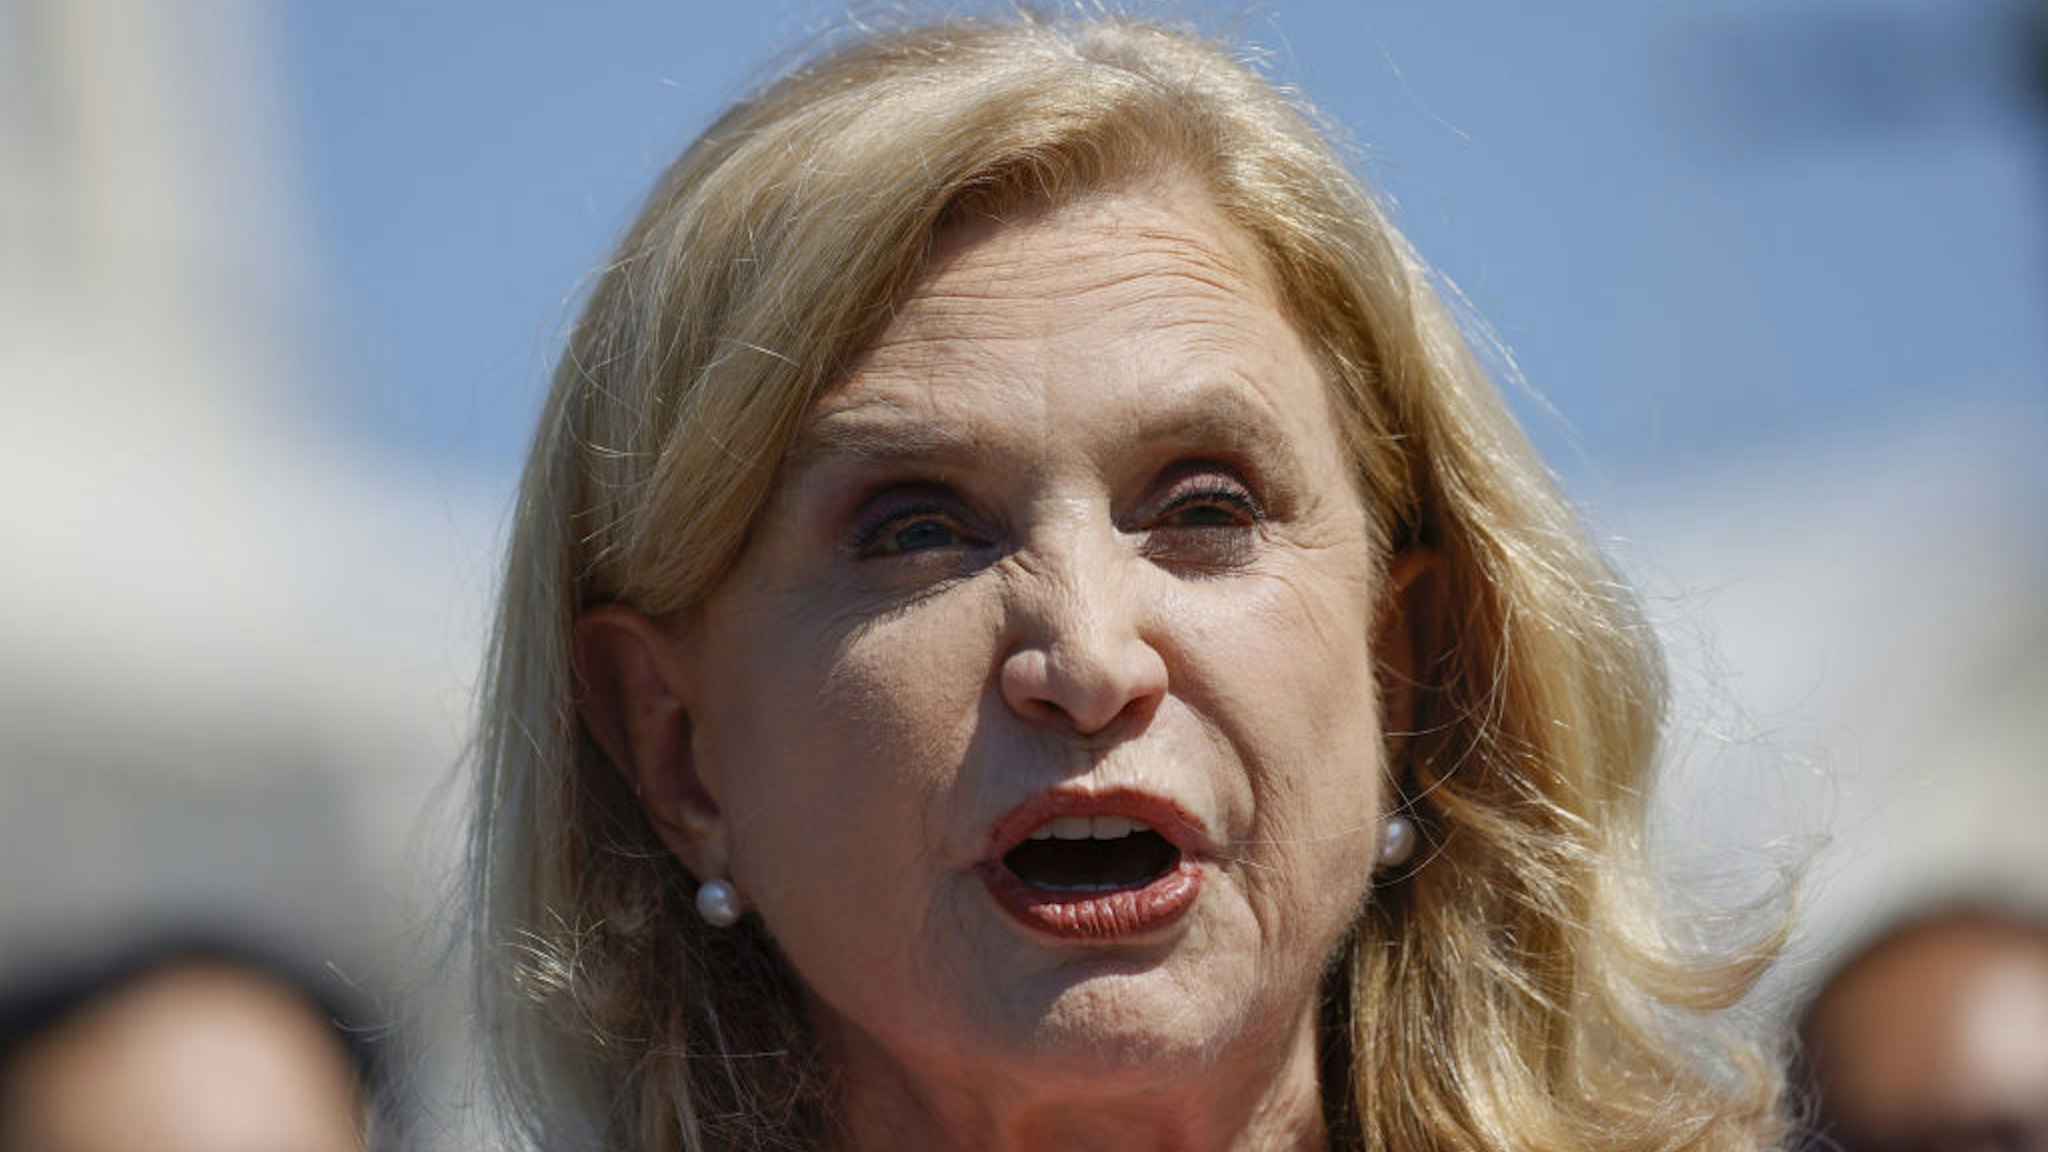 Representative Carolyn Maloney, a Democrat from New York, speaks during a news conference outside the US Capitol in Washington, D.C., US, on Tuesday, July 12, 2022.